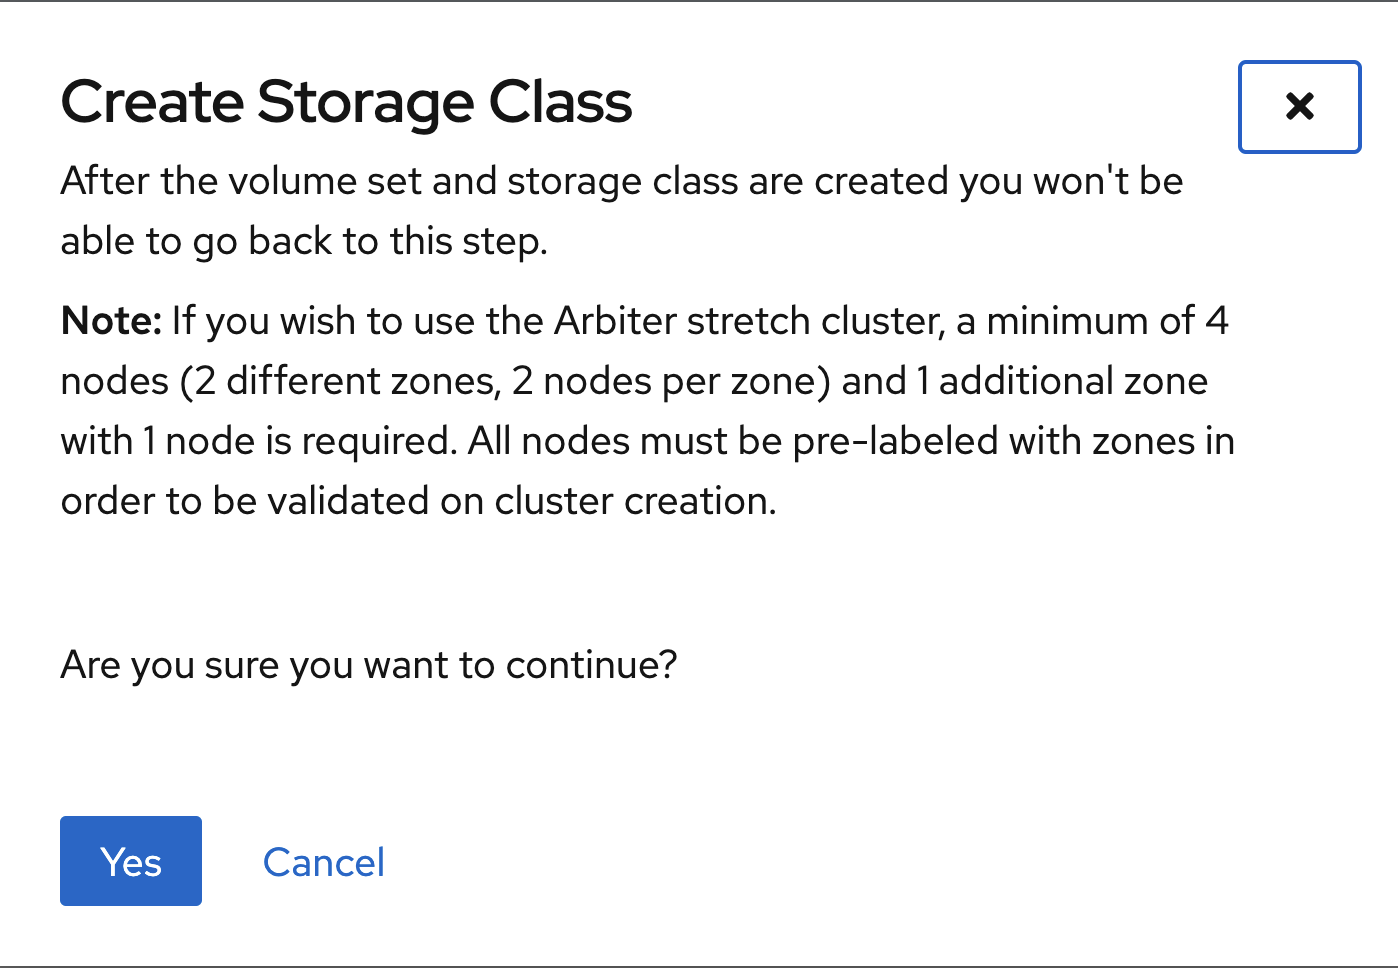 LSO Storage Class Confirmation